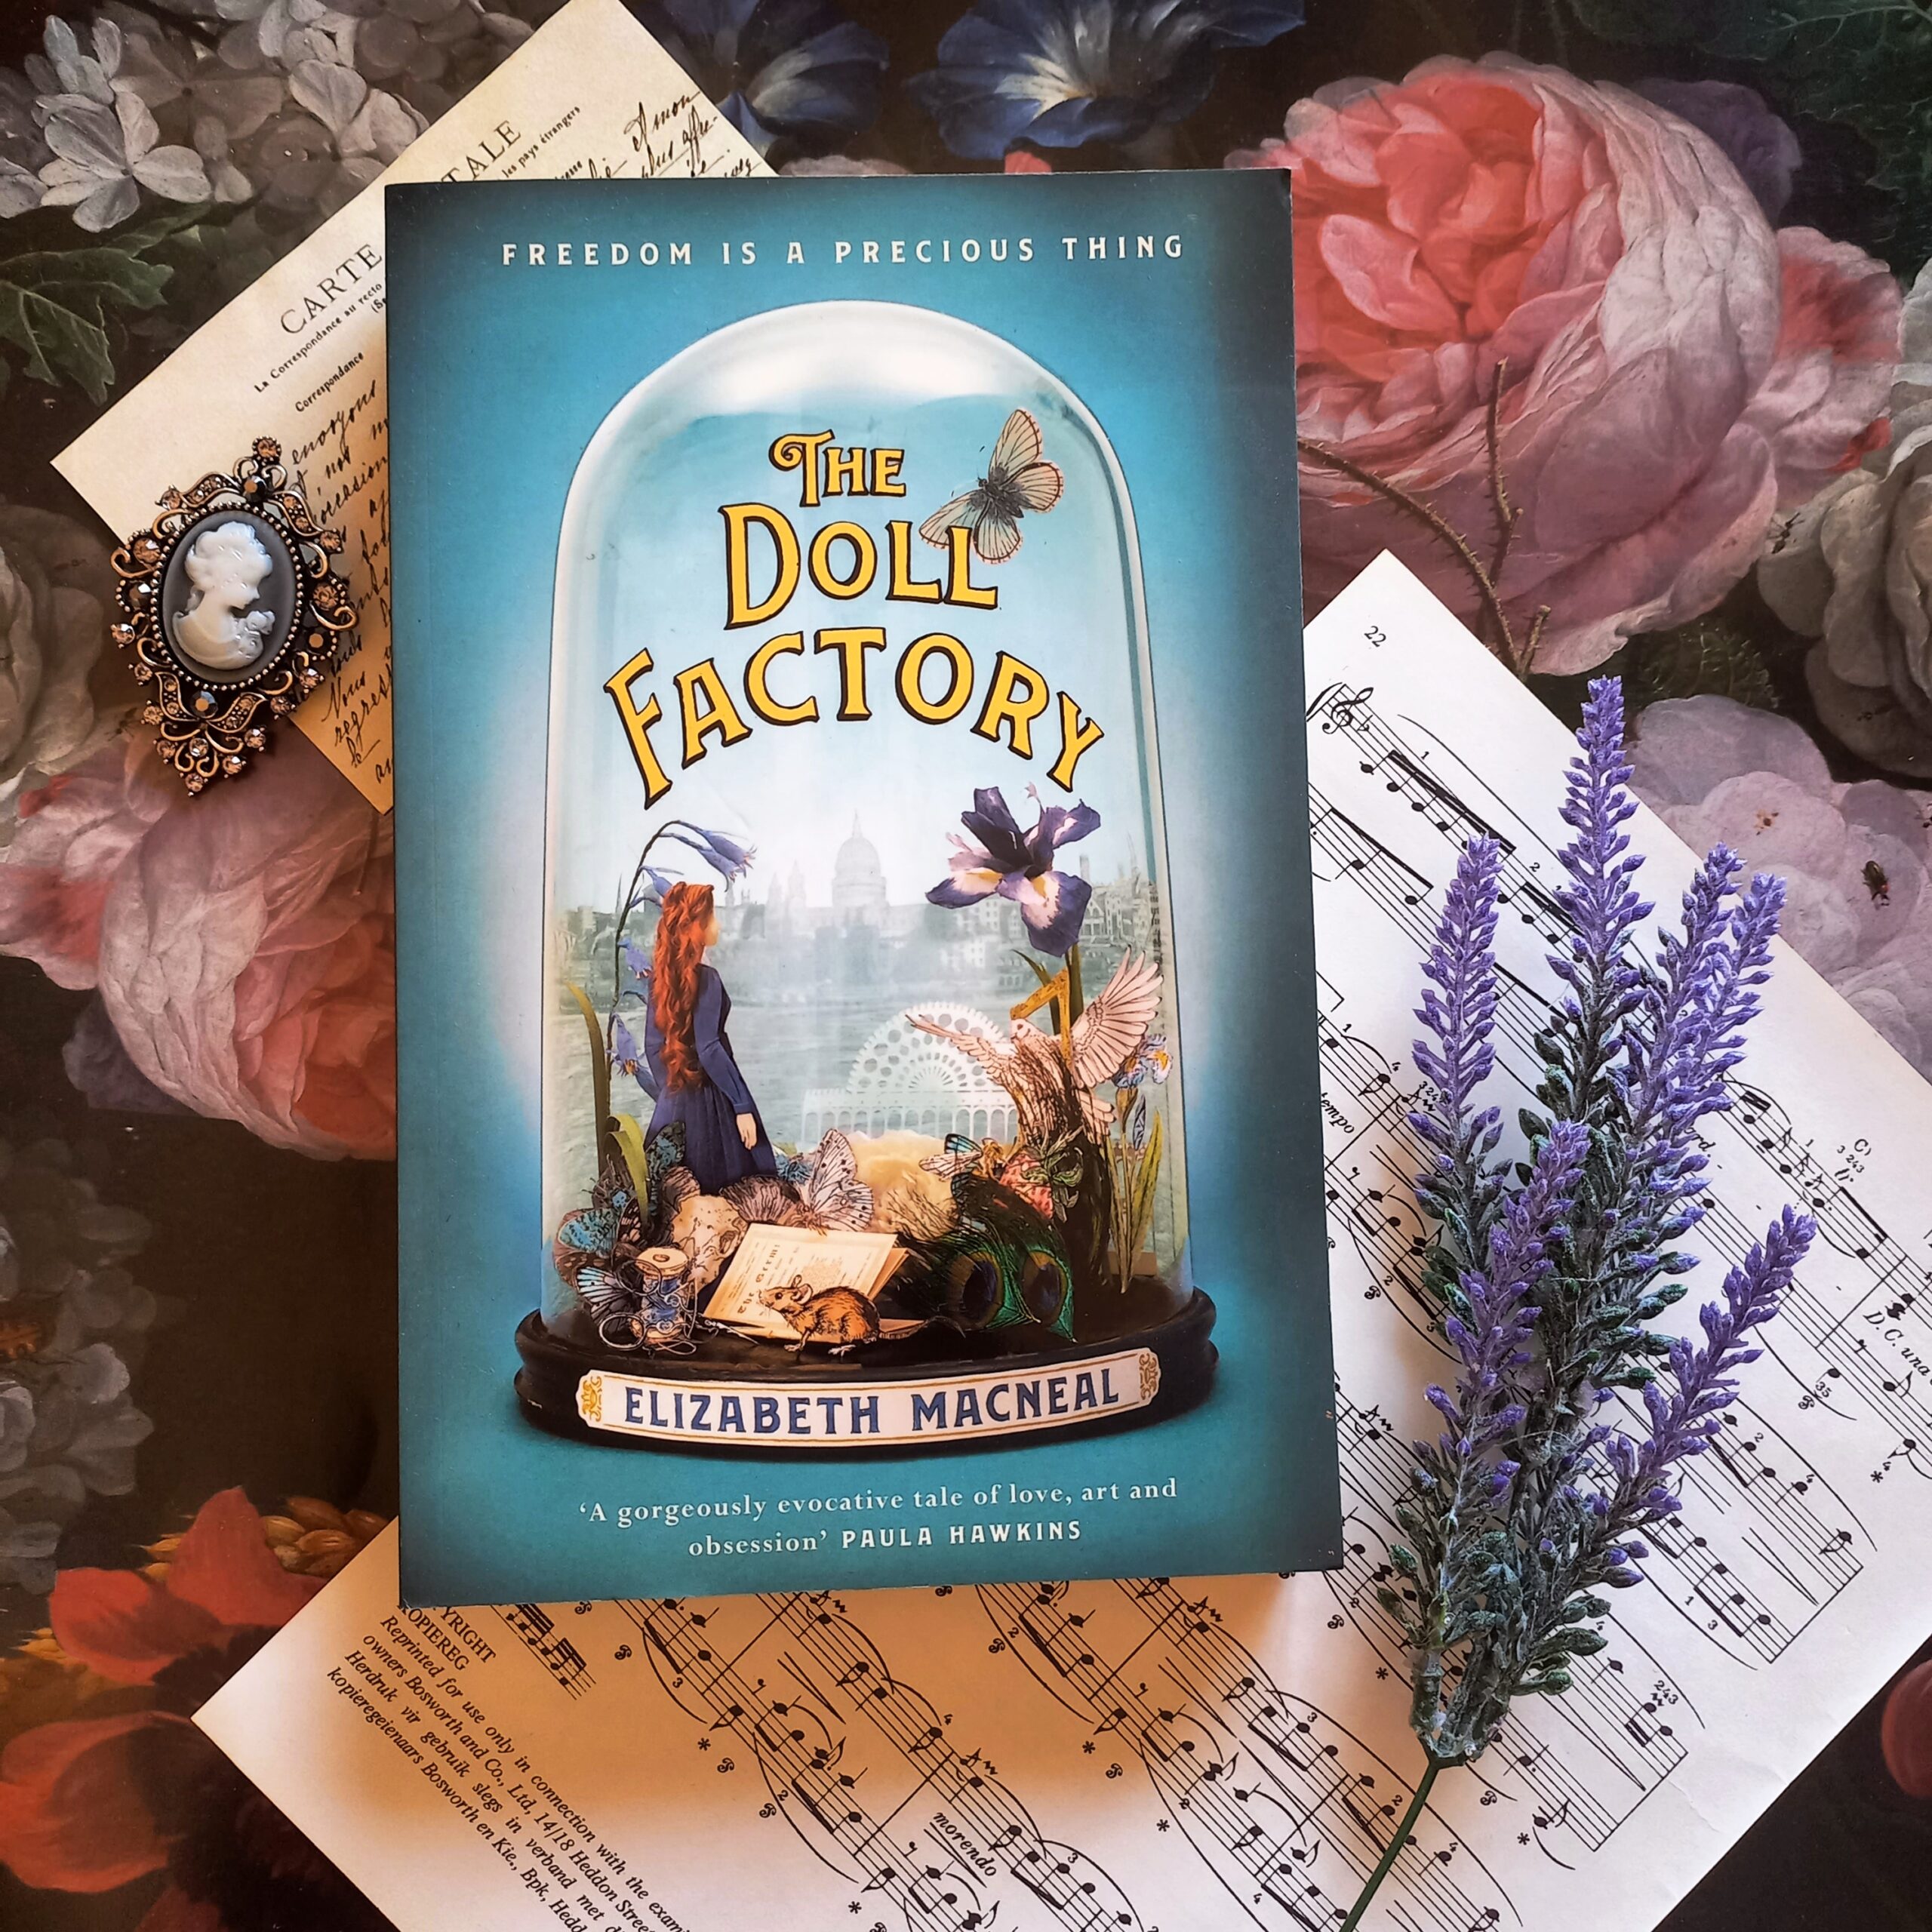 Chasing Dreams and Nightmares: An Overview of ‘The Doll Factory’ by Elizabeth Macneal